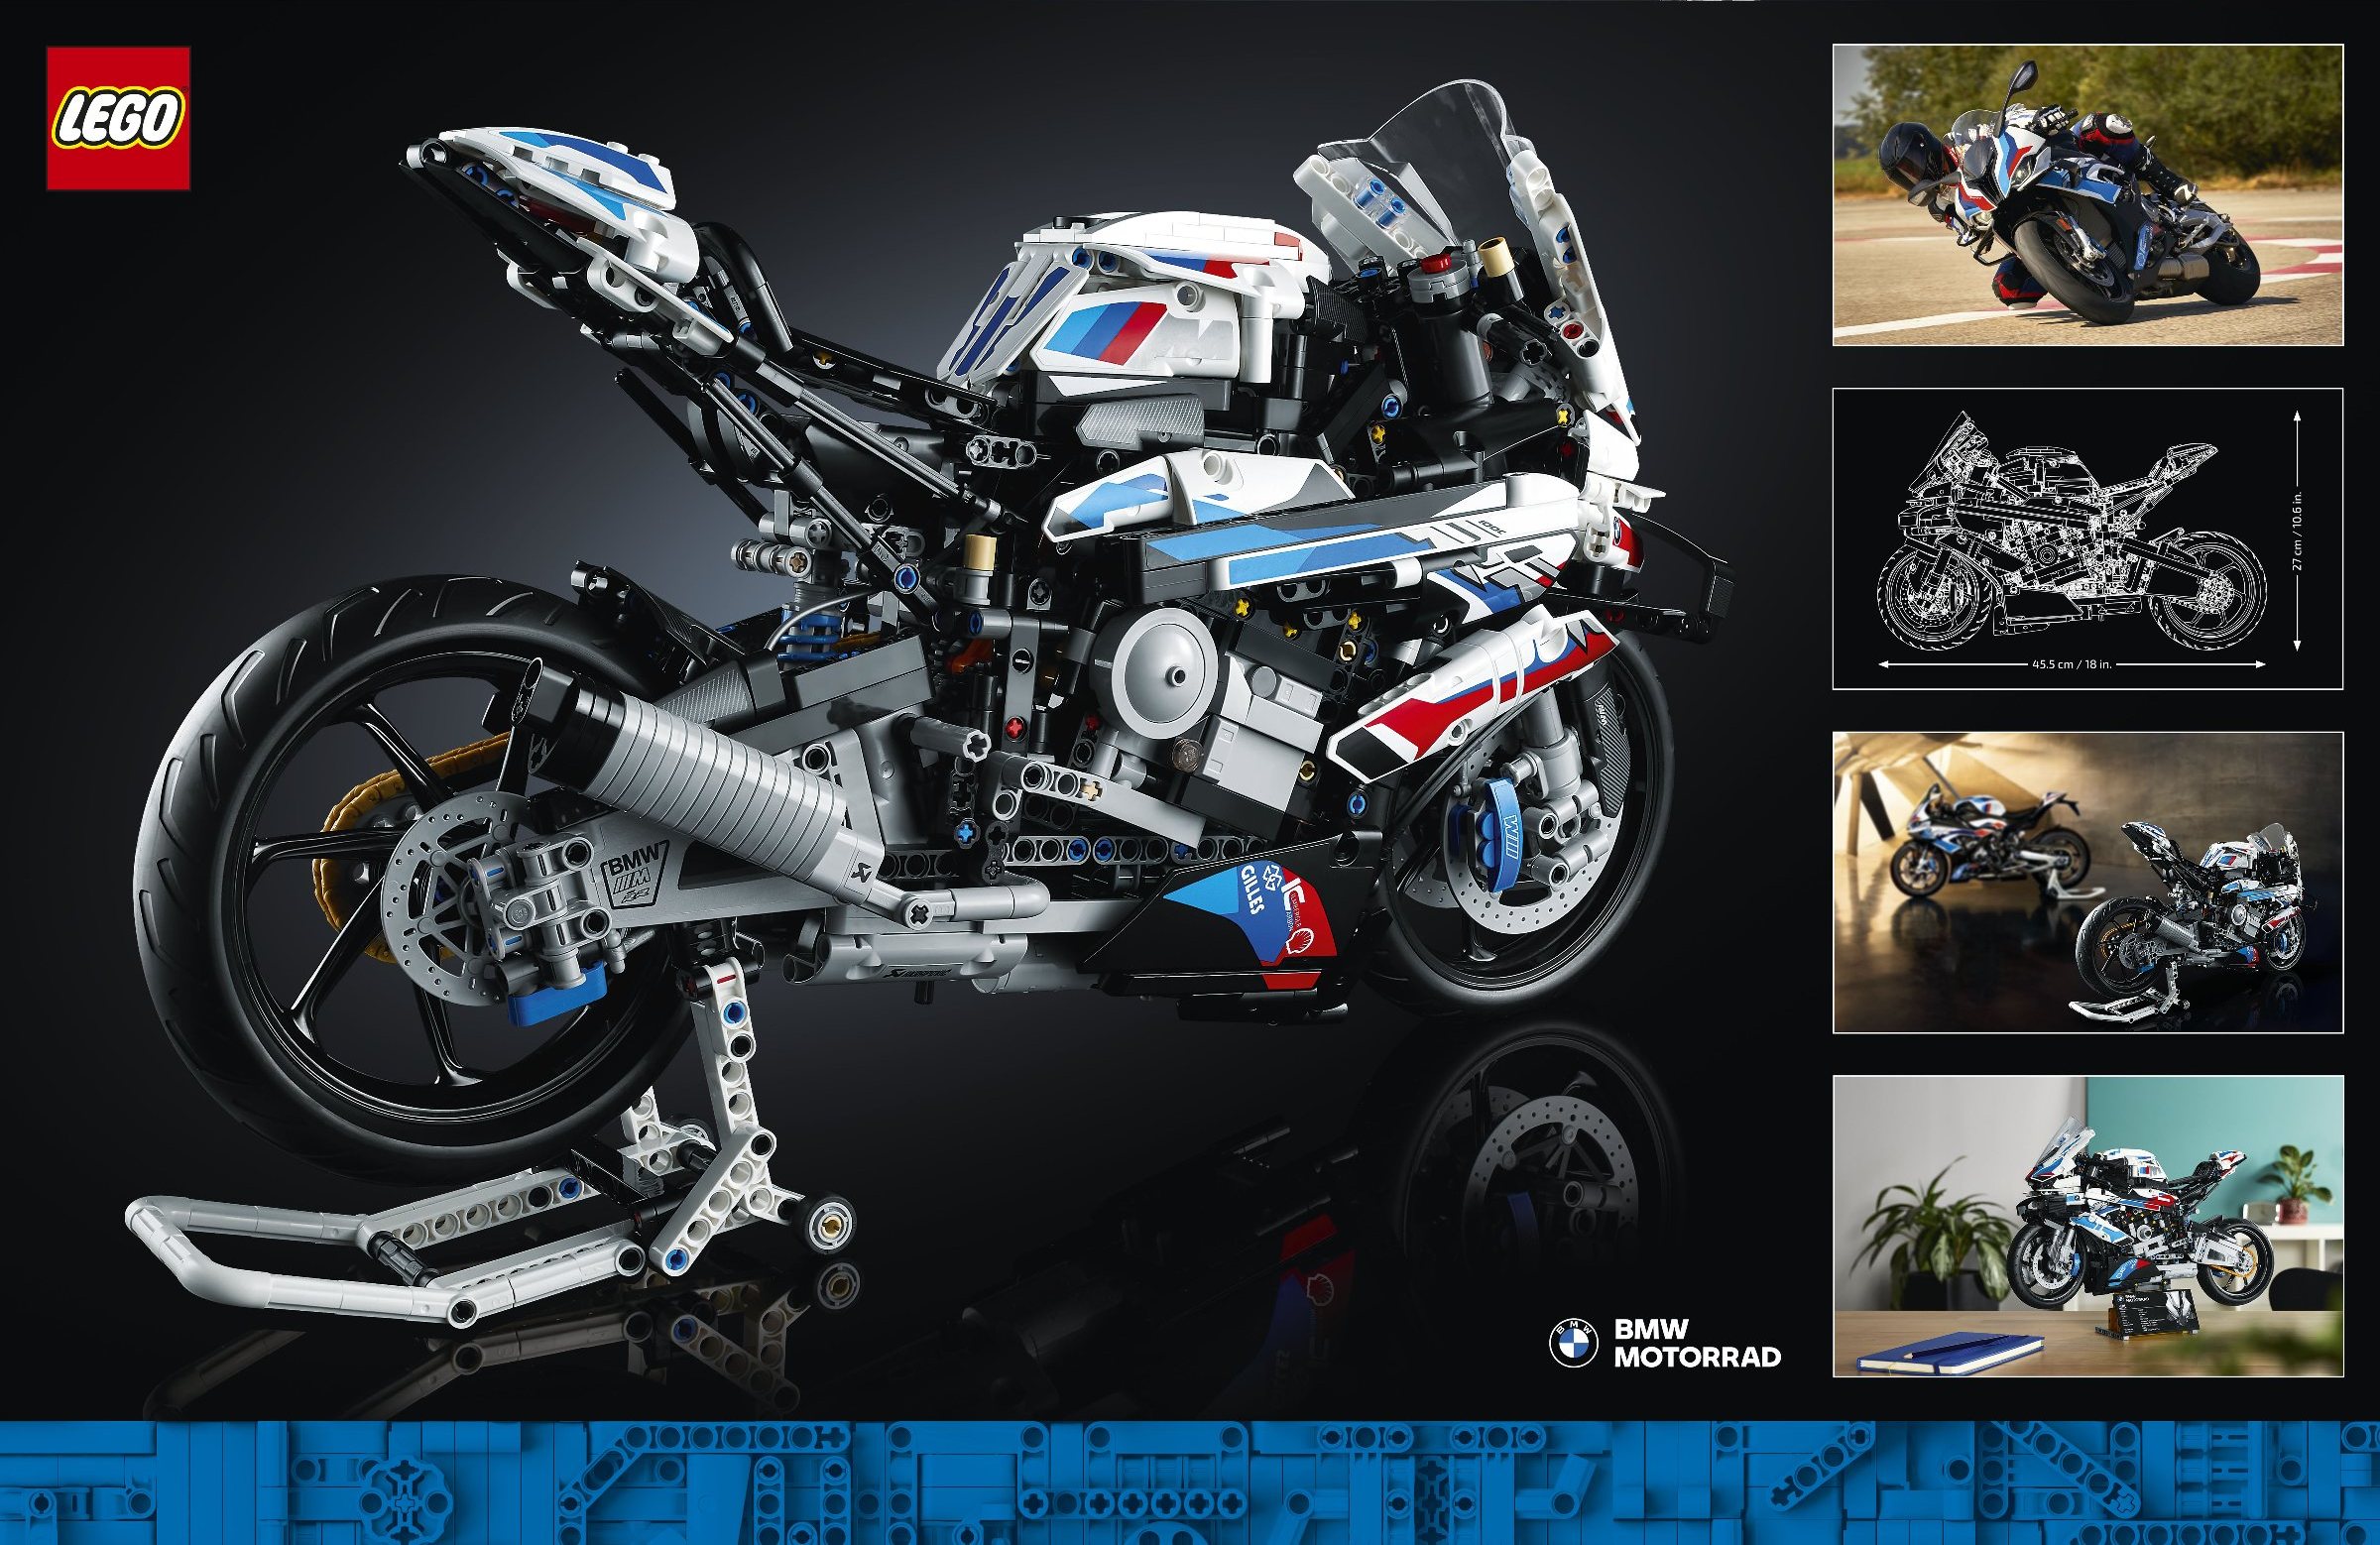 LEGO Technic Unleashes Extremely Detailed 1:5-Scale BMW M 1000 RR